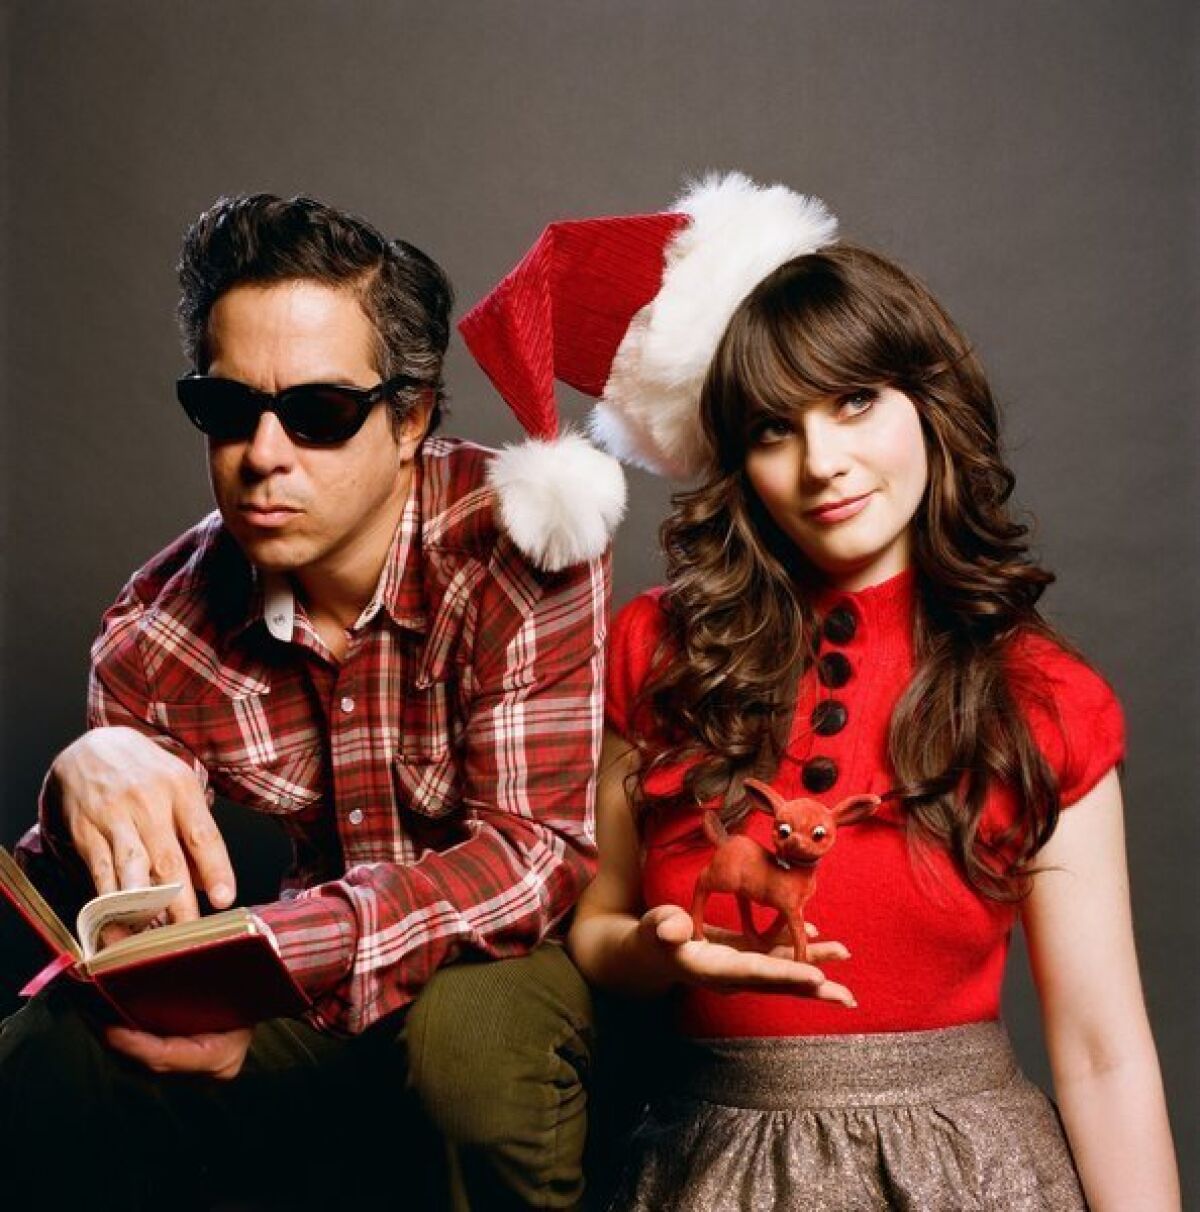 She & Him are M. Ward, in dark sunglasses and paging through a book, and Zooey Deschanel. wearing a Santa hat and holding a Rudolph figurine.